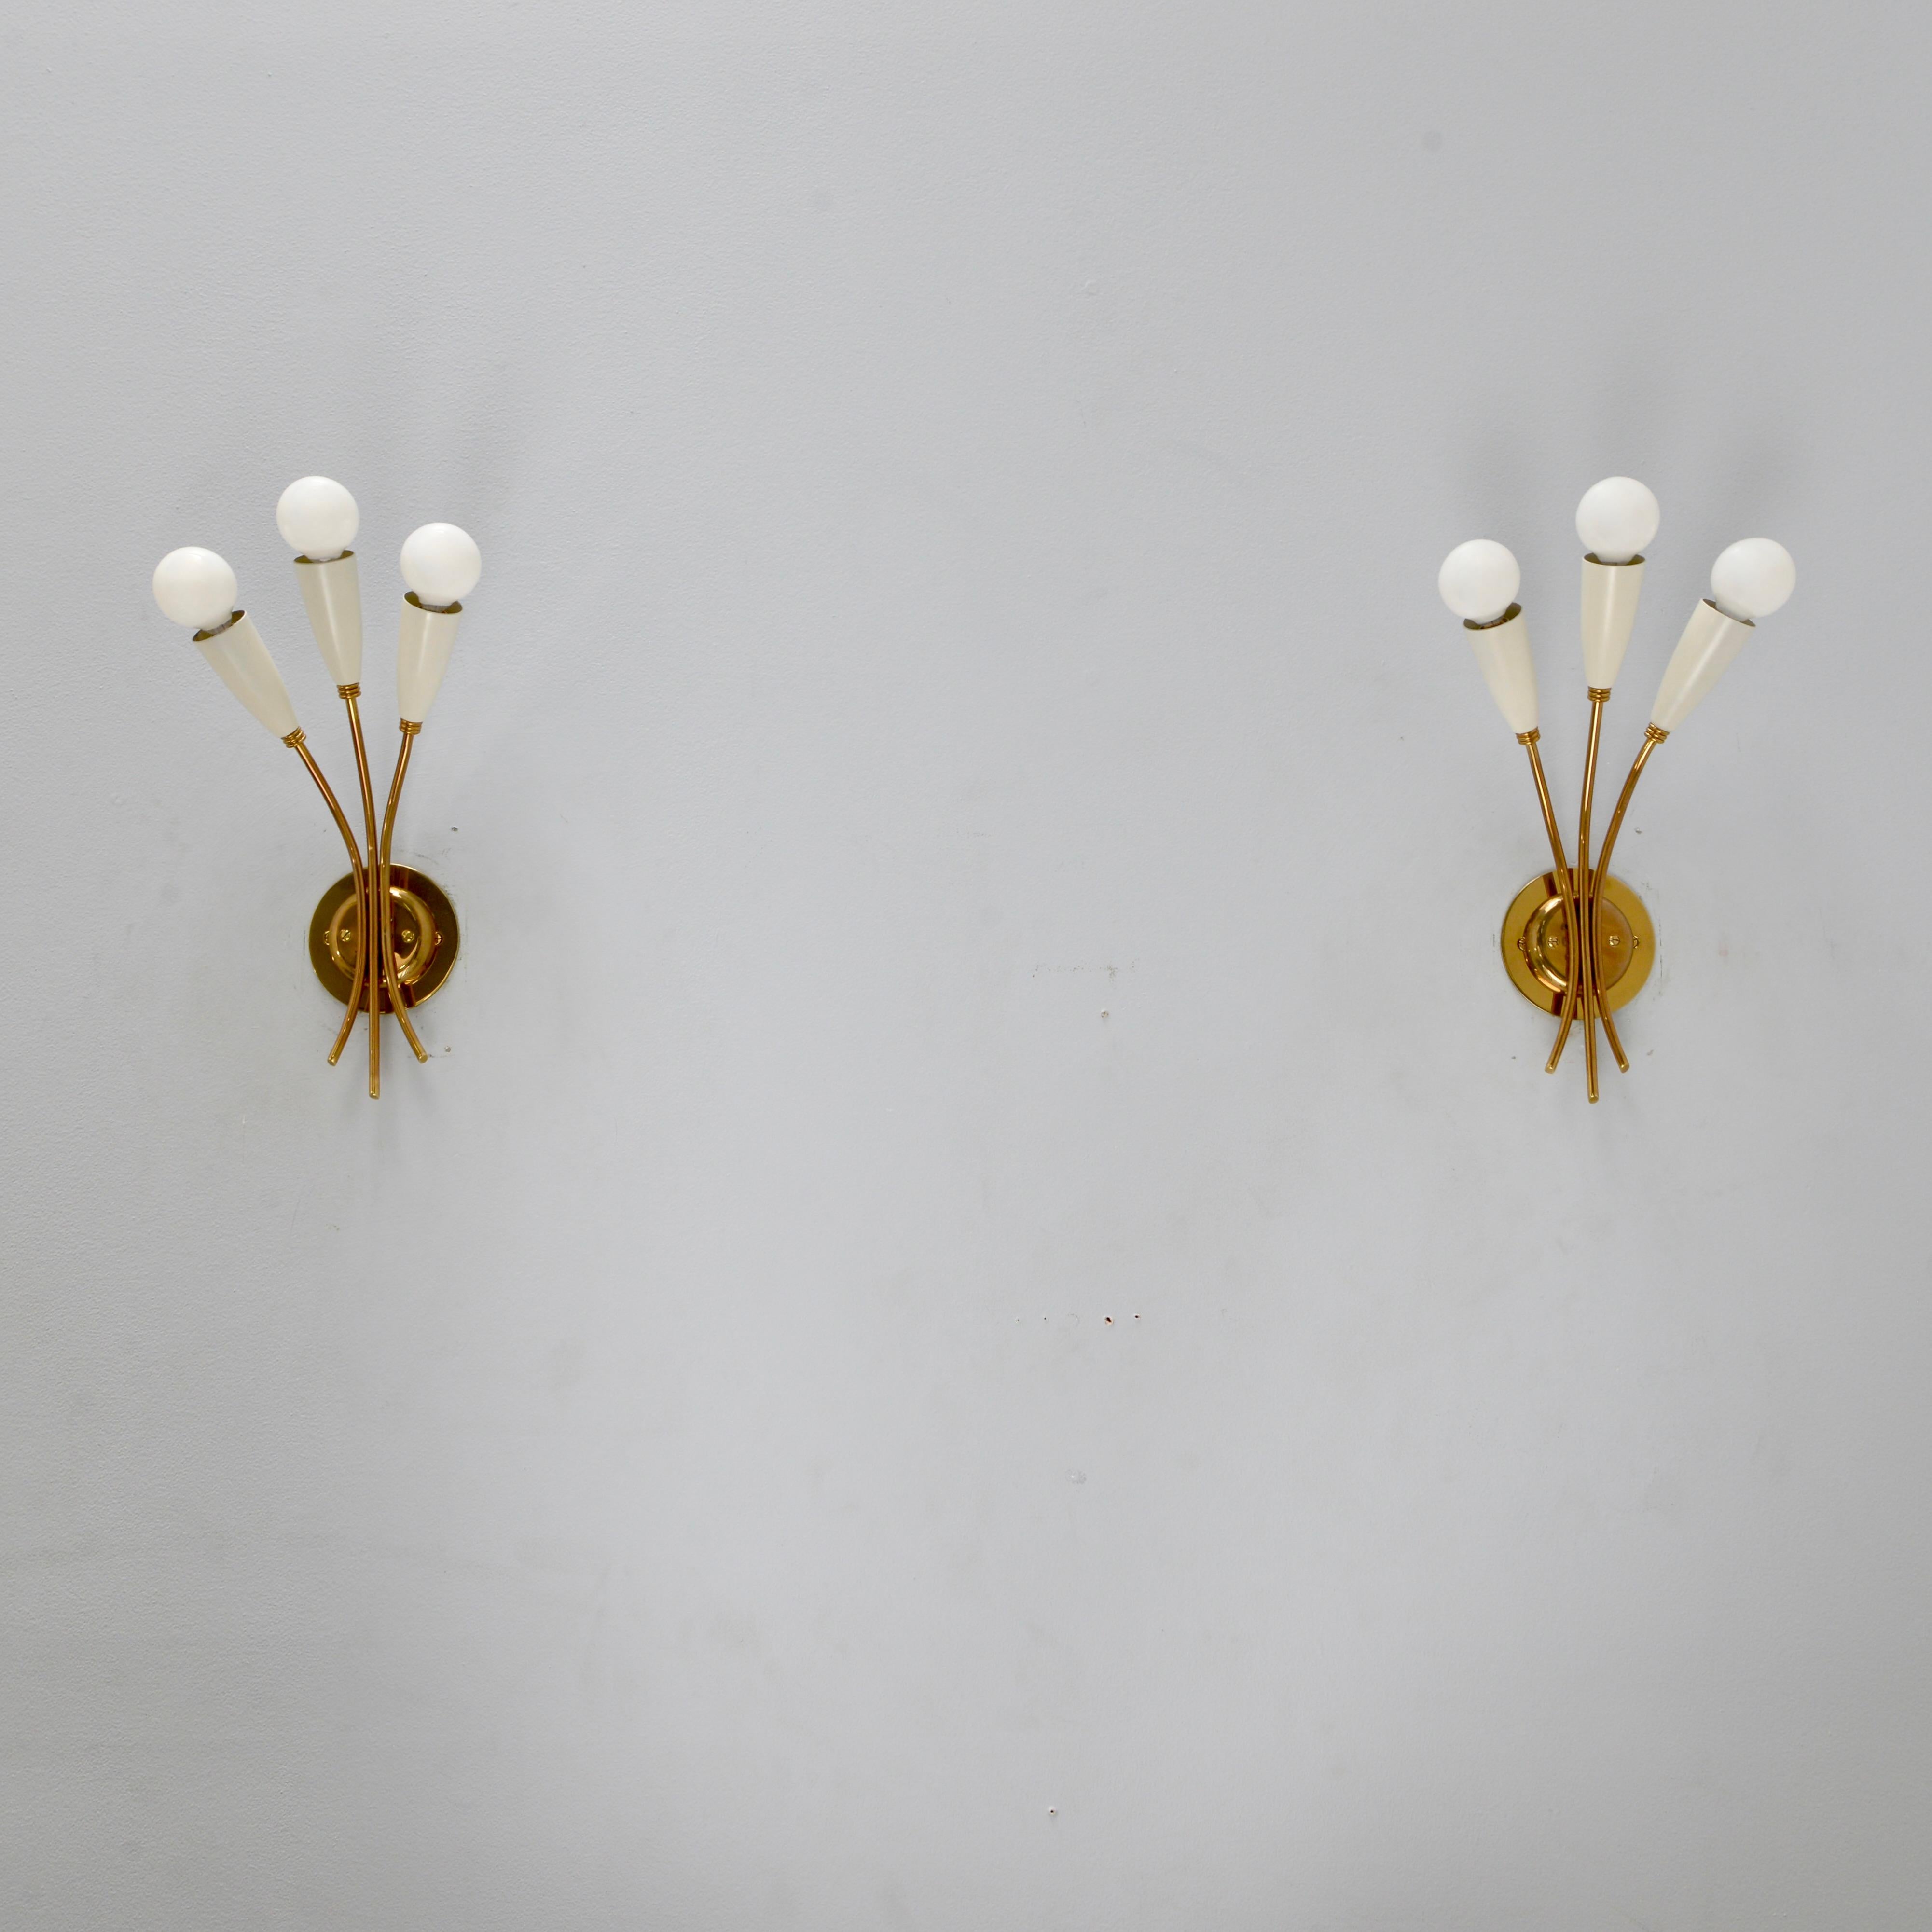 Pair of midcentury Italian 3 arm off-white botanical sconces from the 1950s. These sconces have a lightly patinated brass, and painted aluminum socket cups. Original finish. They are restored with wiring of 3 E12 candelabra based sockets per sconce,